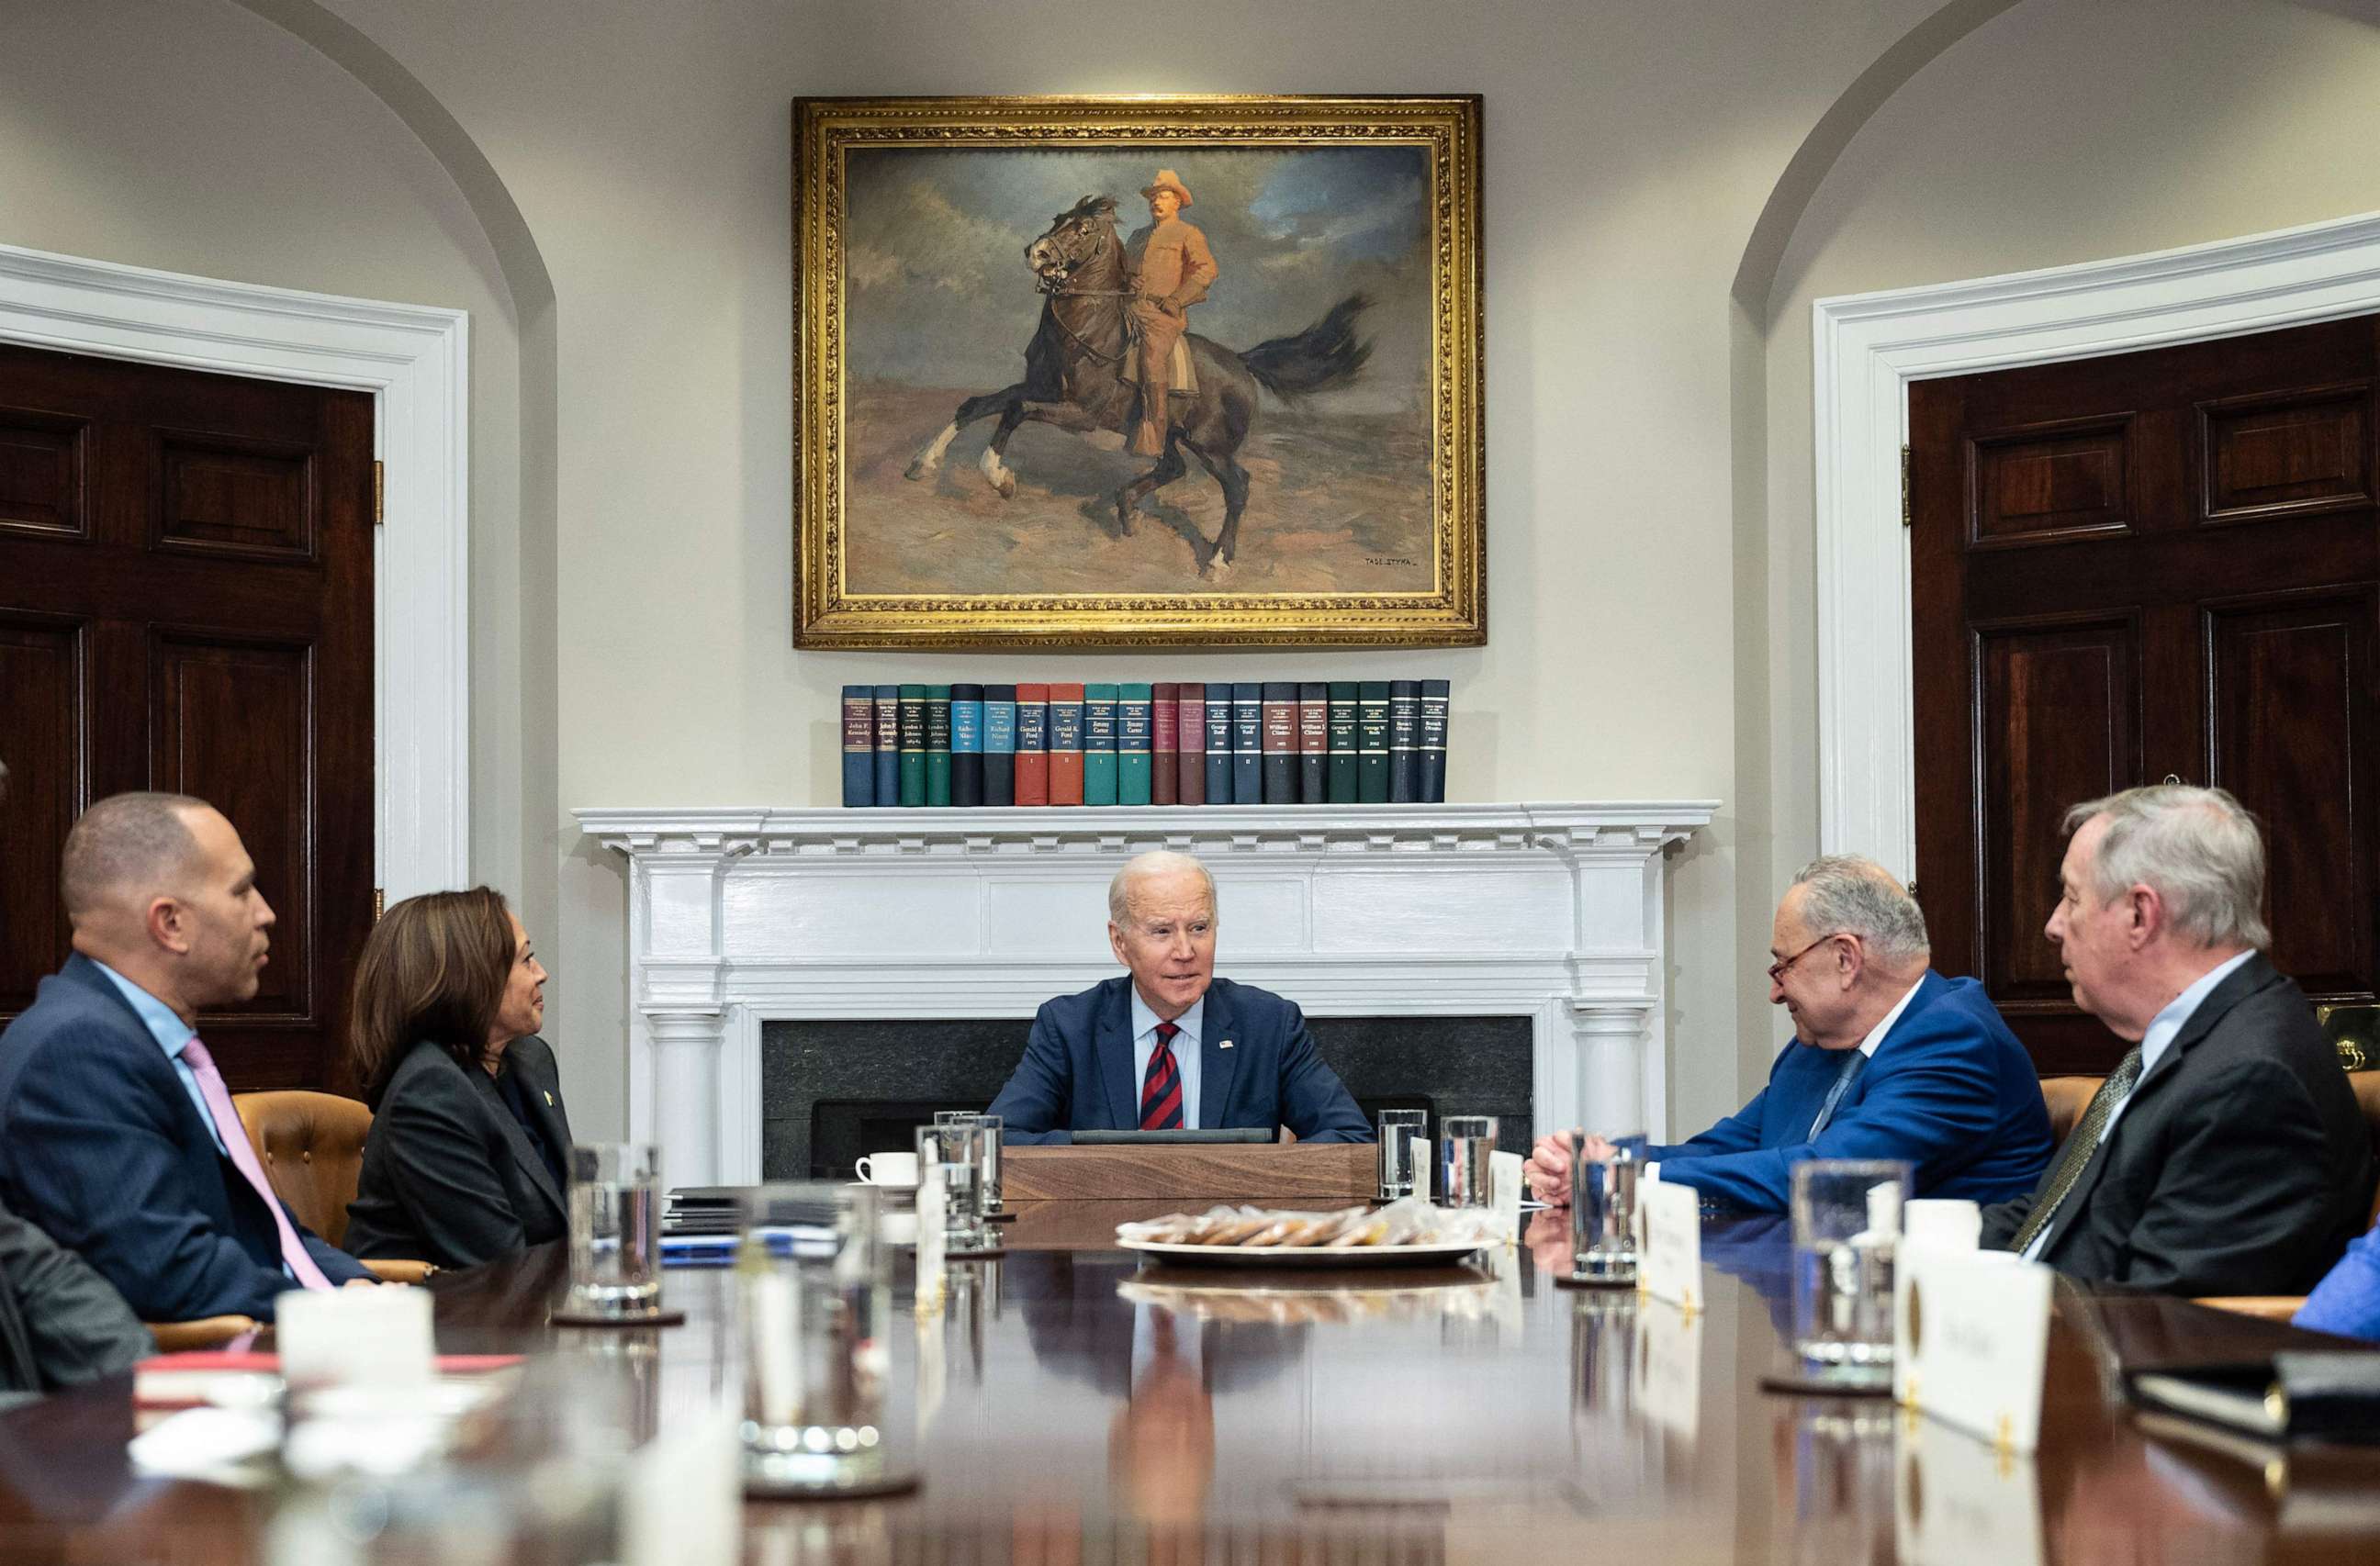 PHOTO: President Joe Biden speaks as he hosts Democratic Congressional leaders in the Roosevelt Room of the White House in Washington, DC, on Jan. 24, 2023.